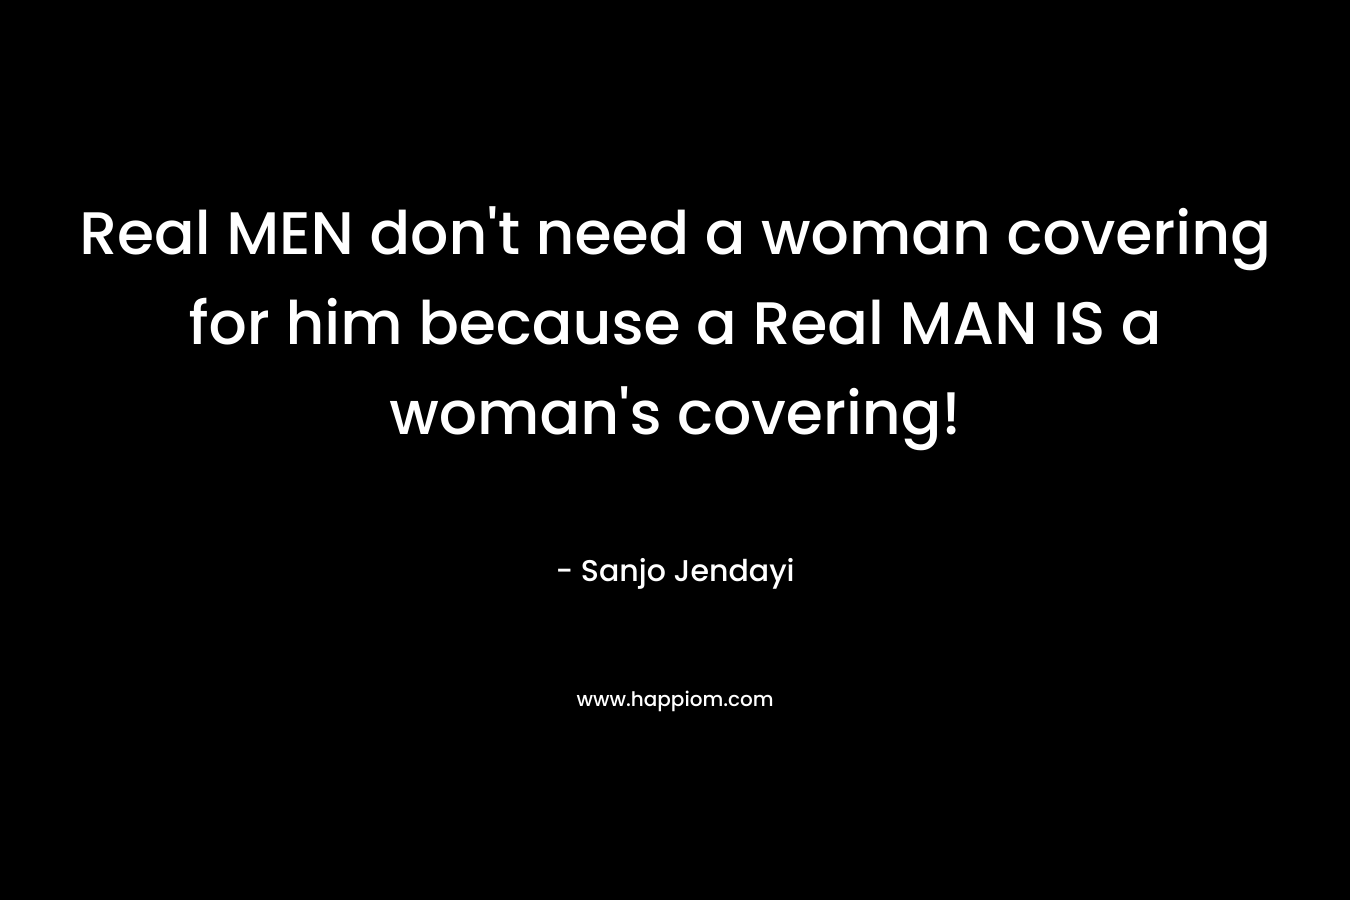 Real MEN don't need a woman covering for him because a Real MAN IS a woman's covering!